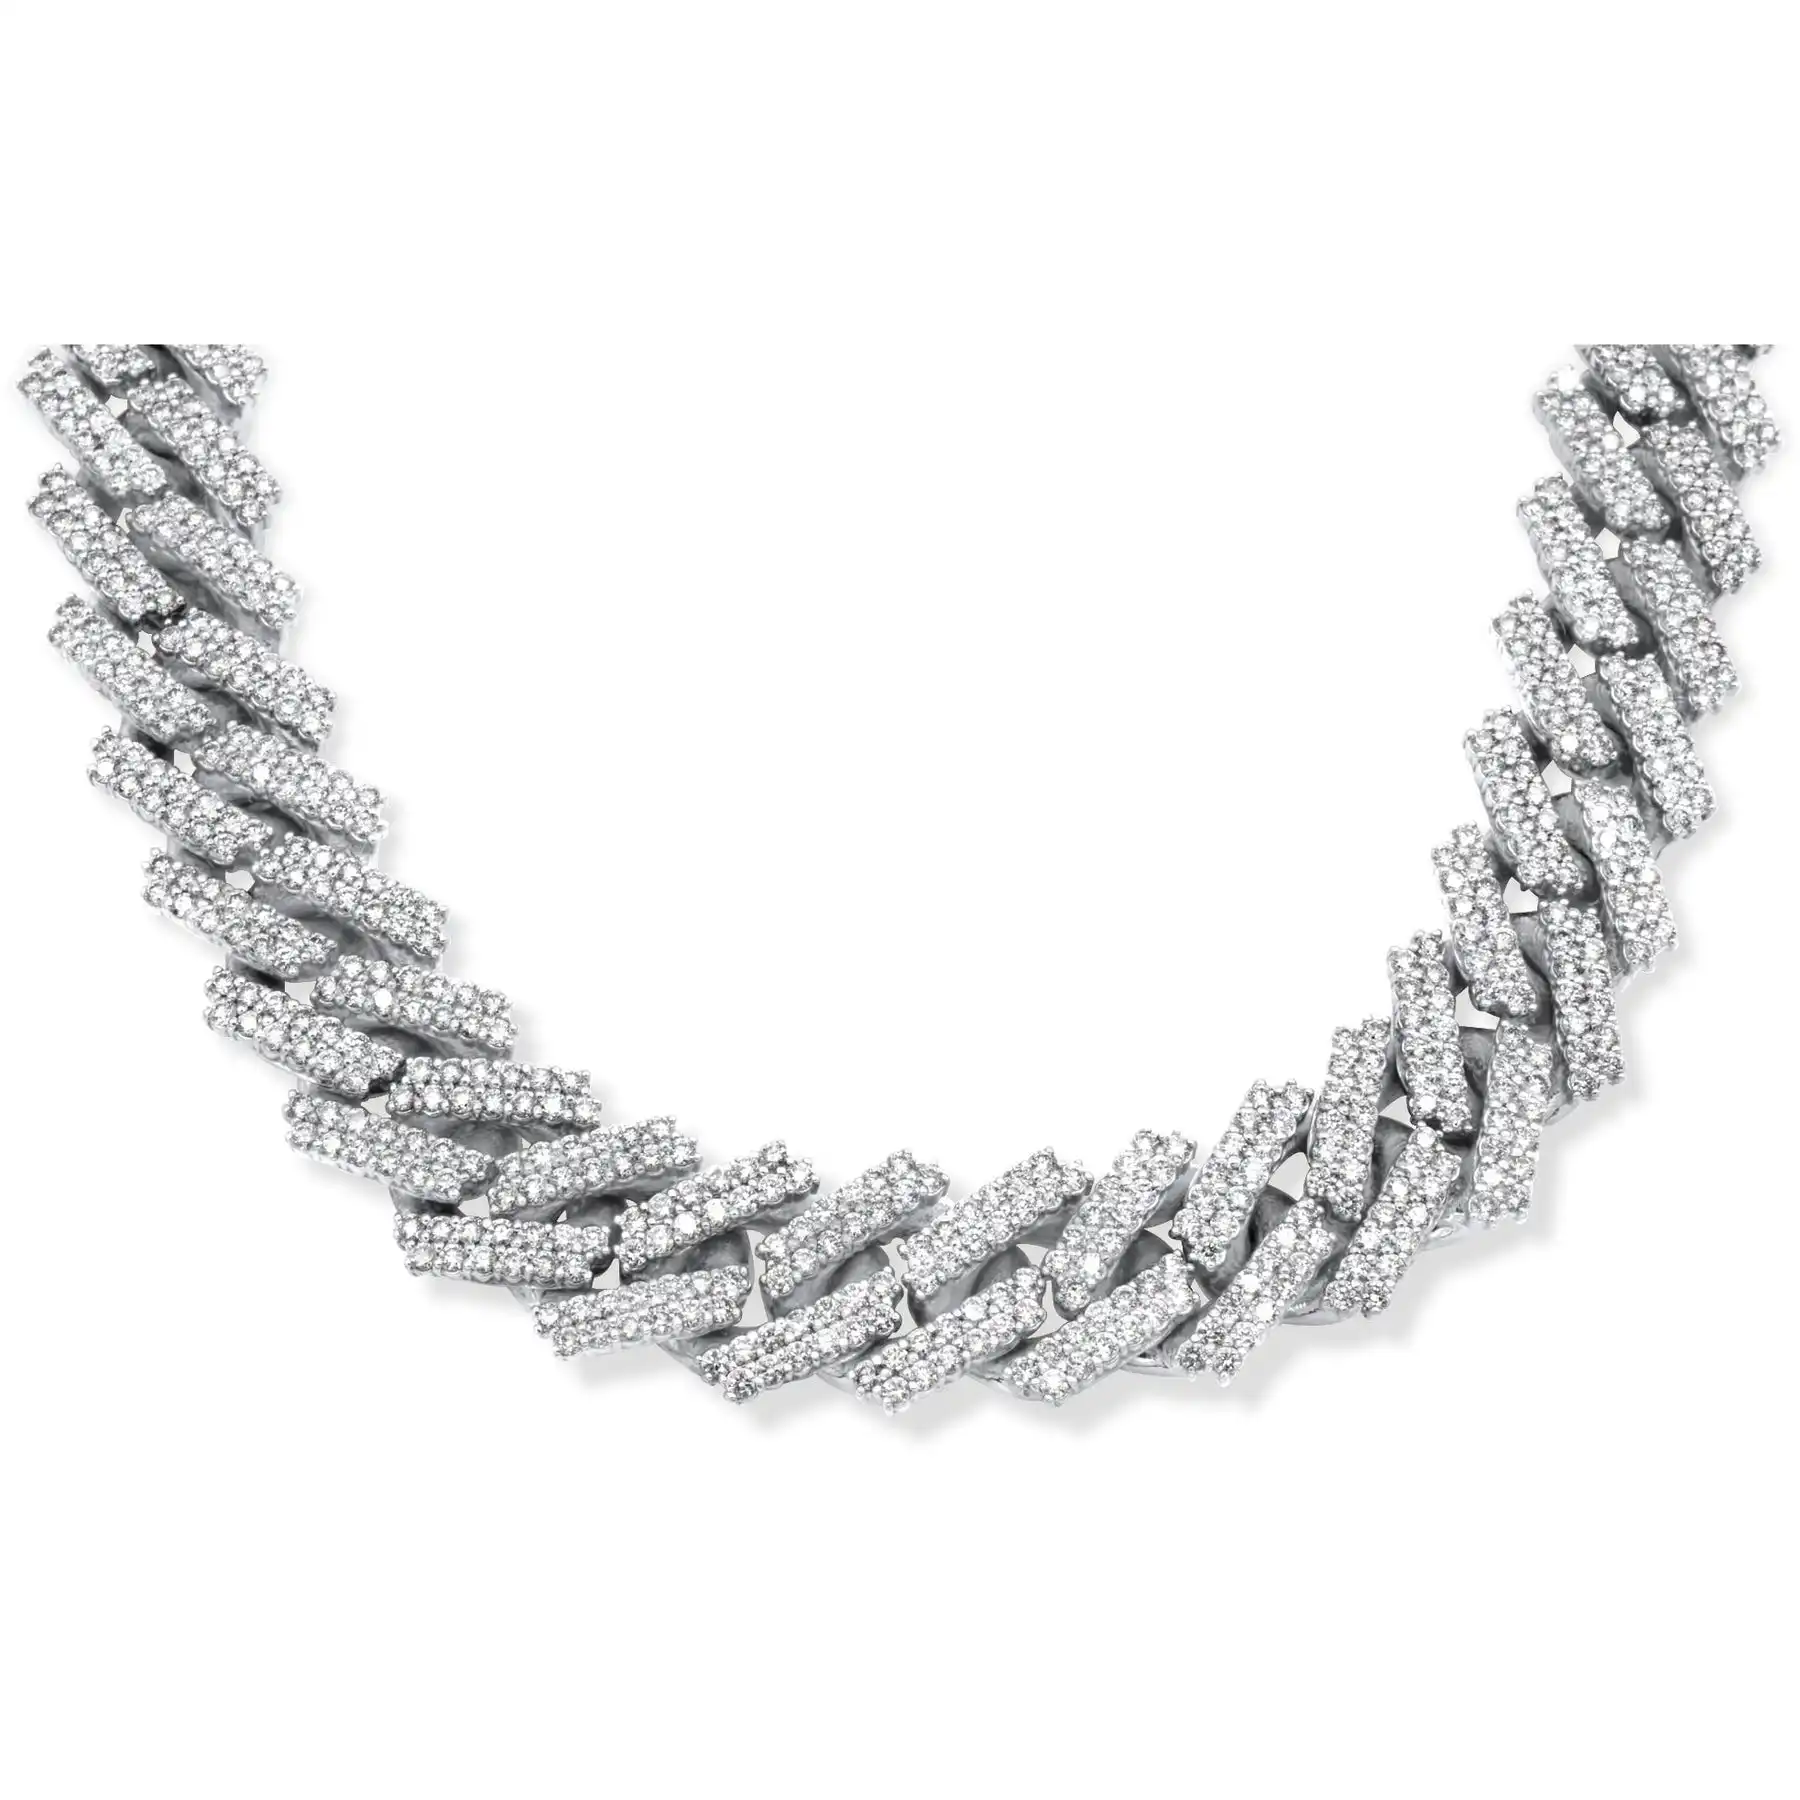 Solid White Gold Cuban Diamond Chain Jewelry Iced Cuban Link Chain Necklace Chain Hip Hop fashion 6mm Silver or Gold Necklace